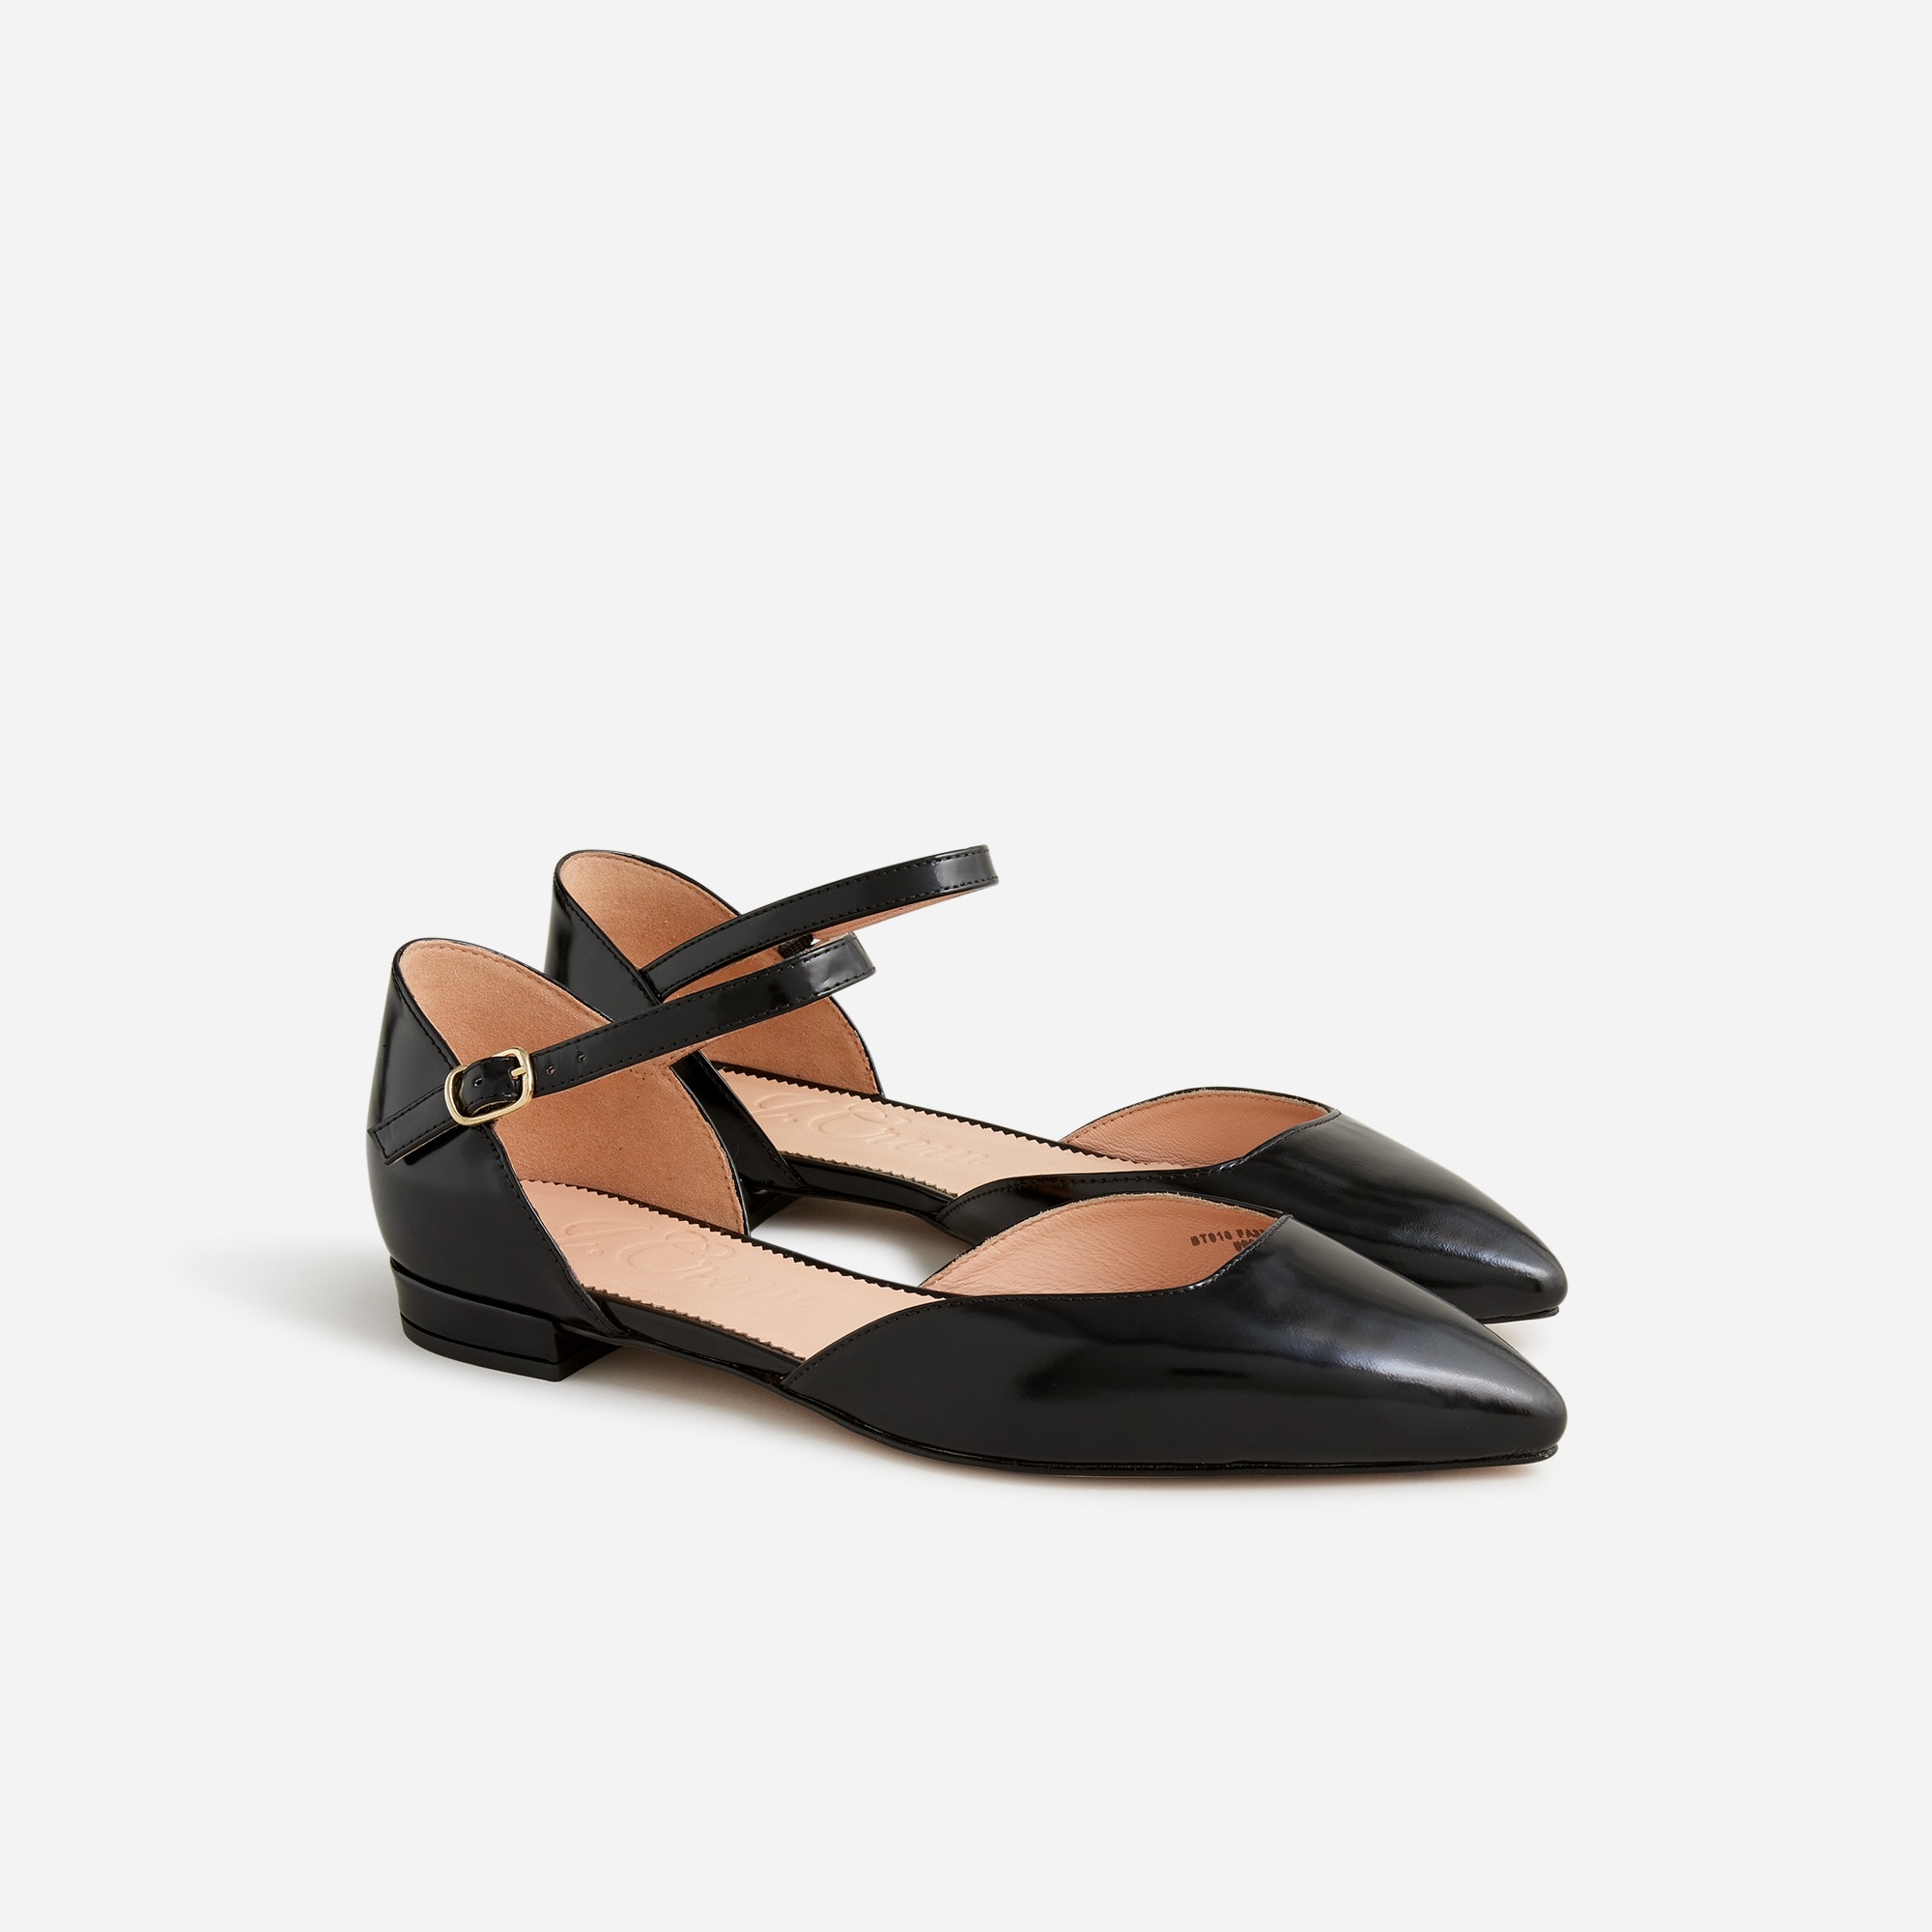 womens Pointed-toe flats in spazzolato leather